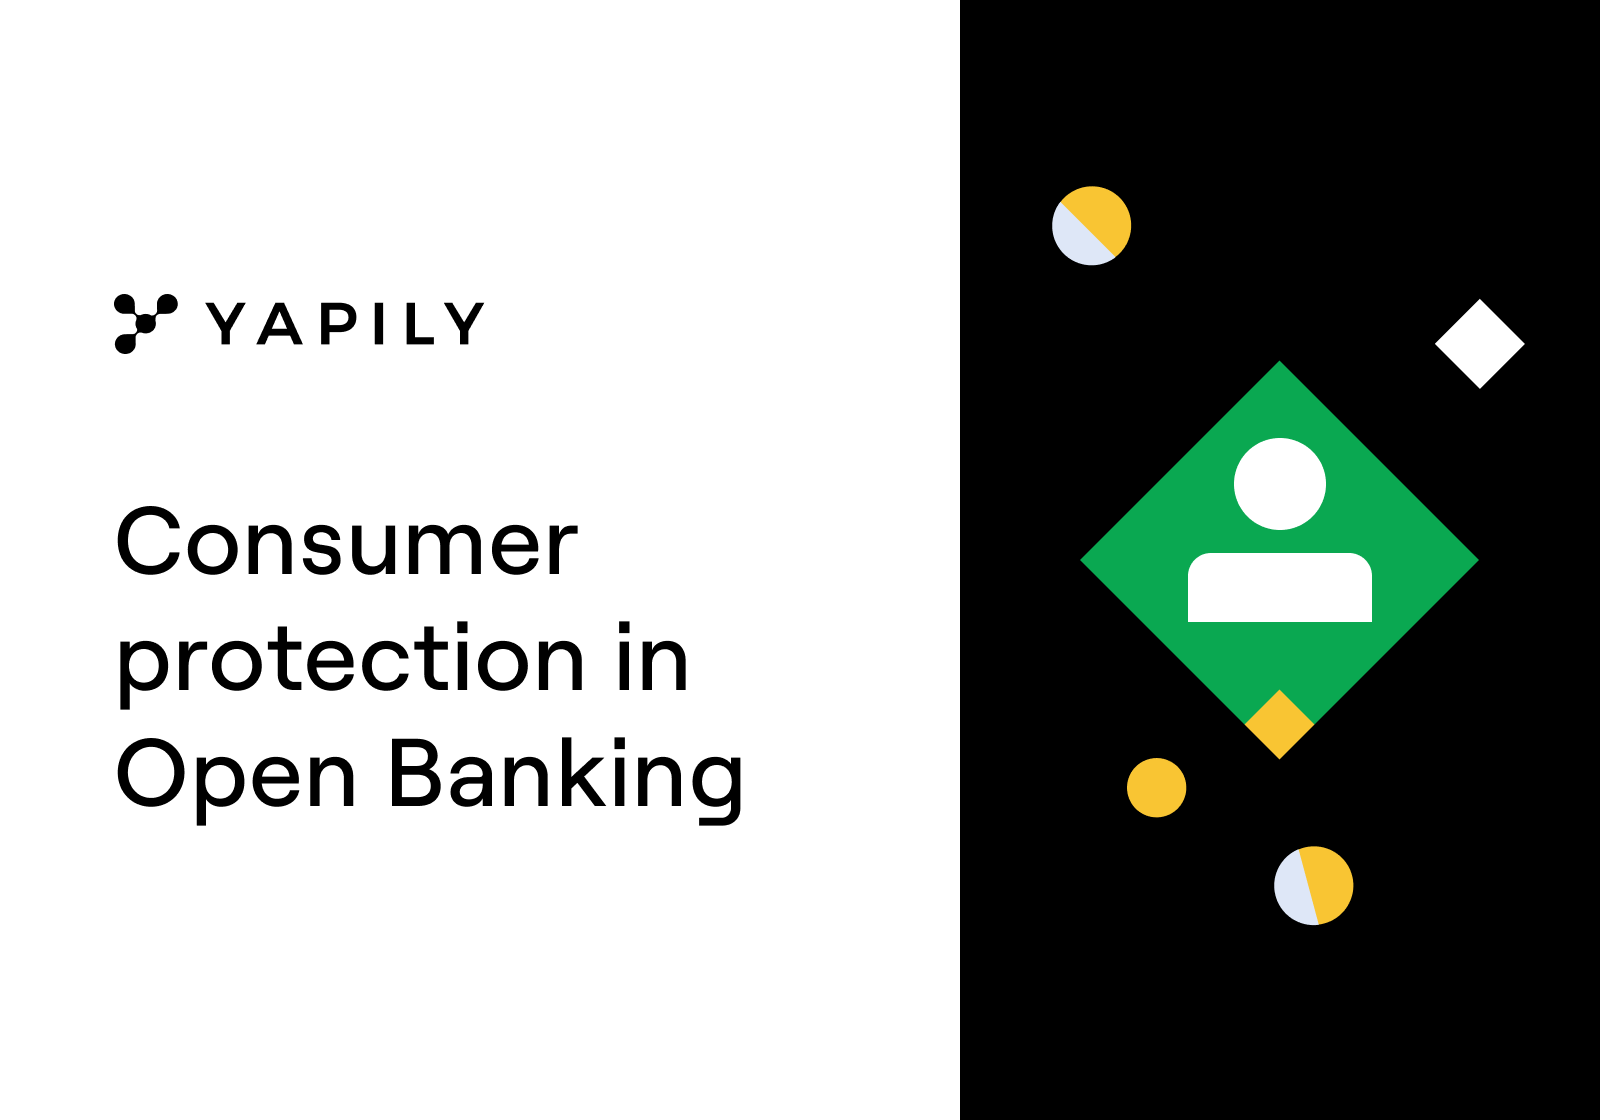 Open Banking payments are no different to interbank payments and require both the highest security standards and an additional layer of protection from financial providers, in order for consumers to build confidence in using these payment services.